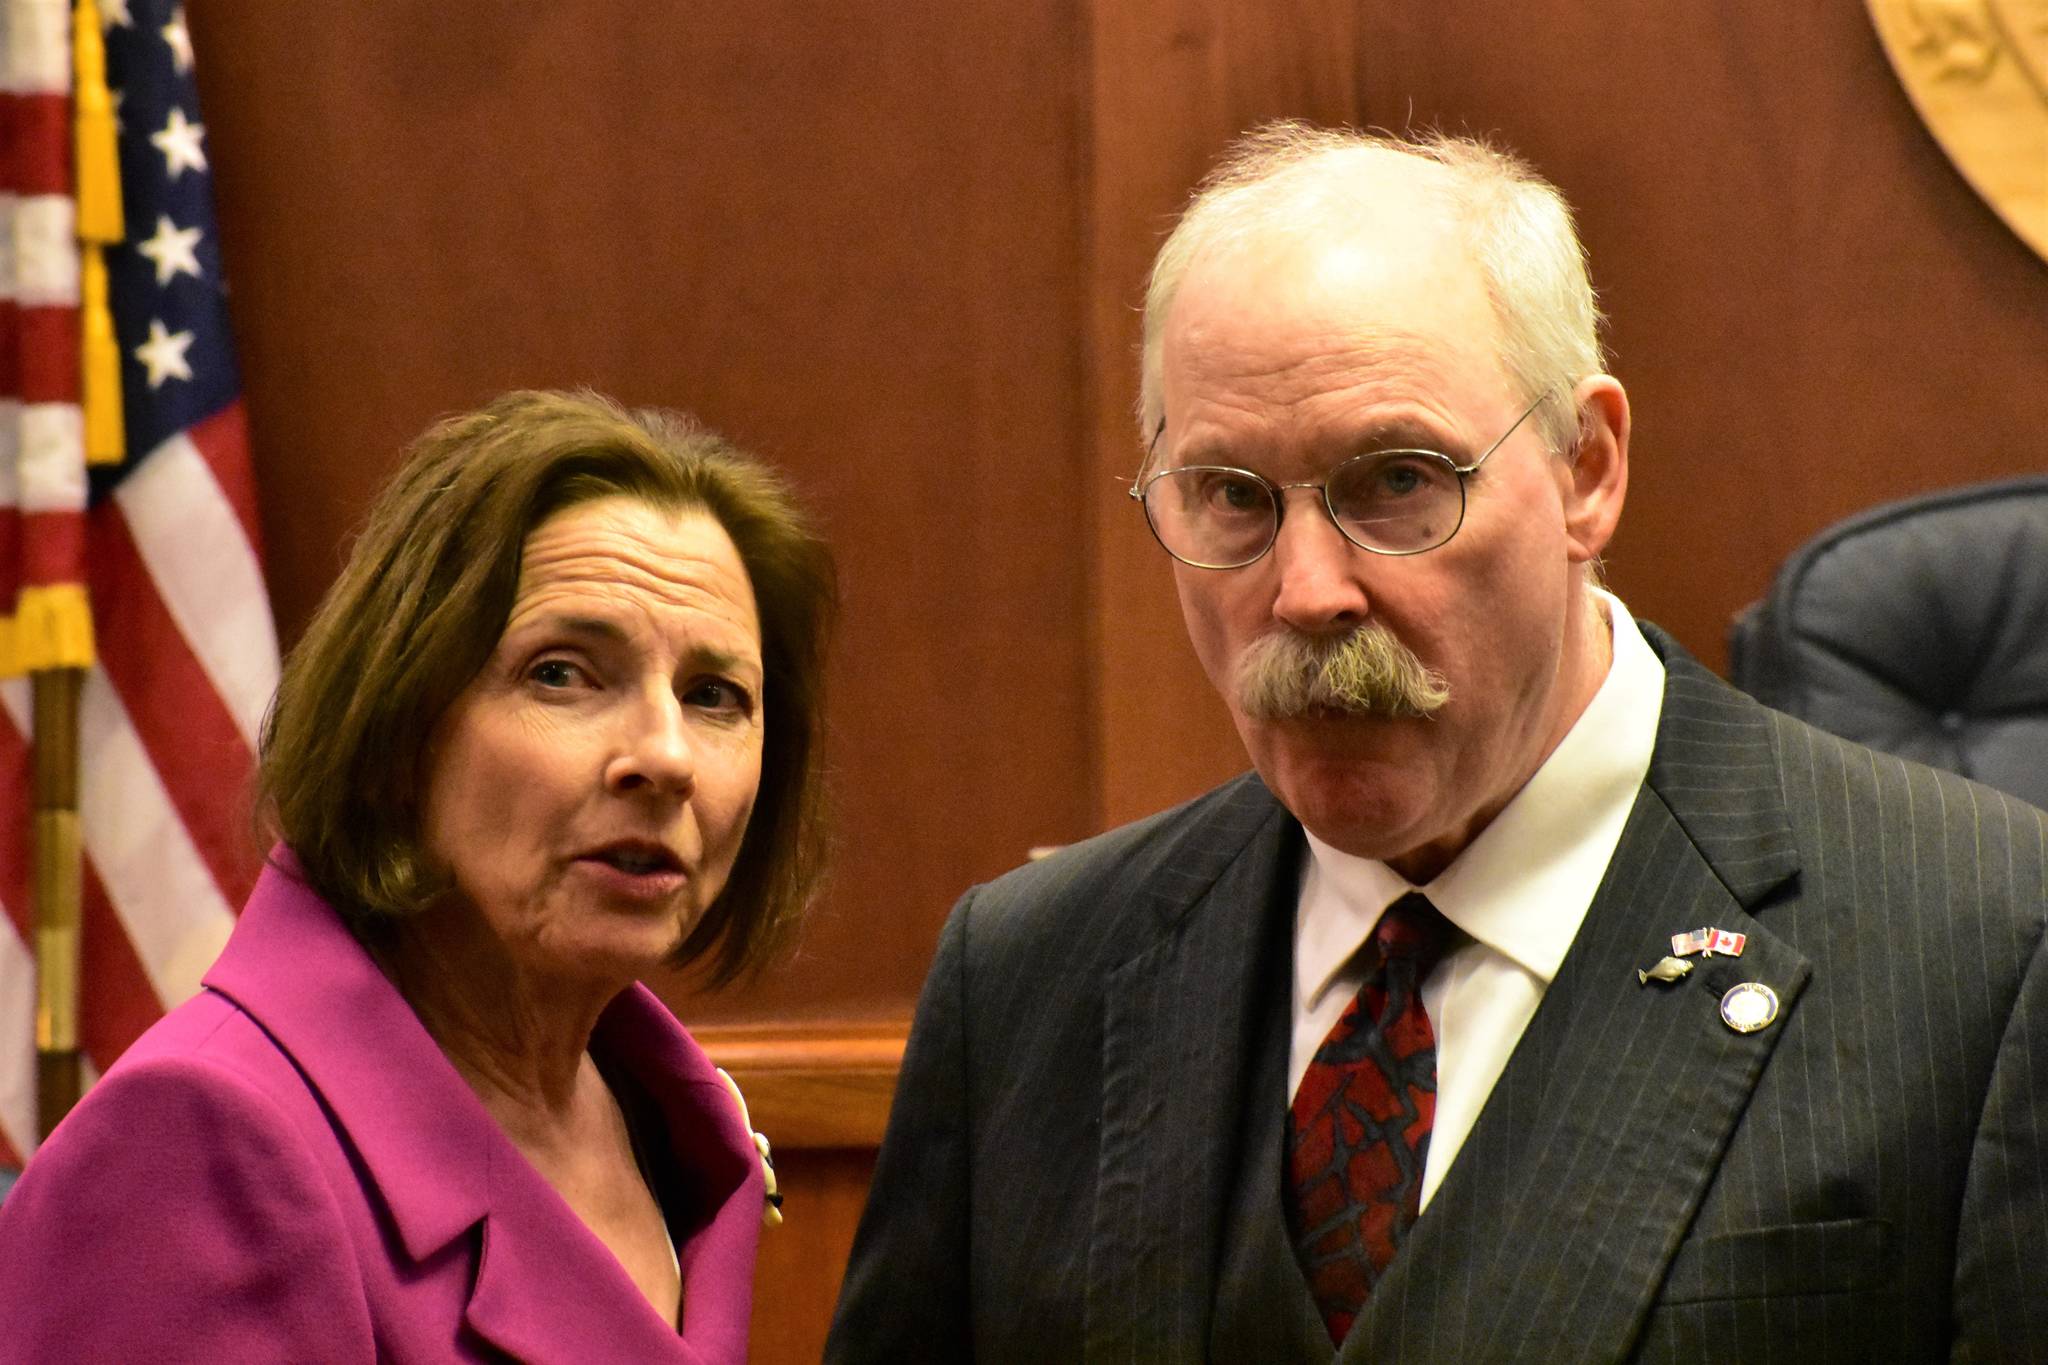 Senate President Cathy Giessel, R-Anchorage, and Sen. Bert Stedman, R-Sitka, talk before the first floor session of the year on Tuesday, Jan. 21, 2020. (Peter Segall | Juneau Empire)